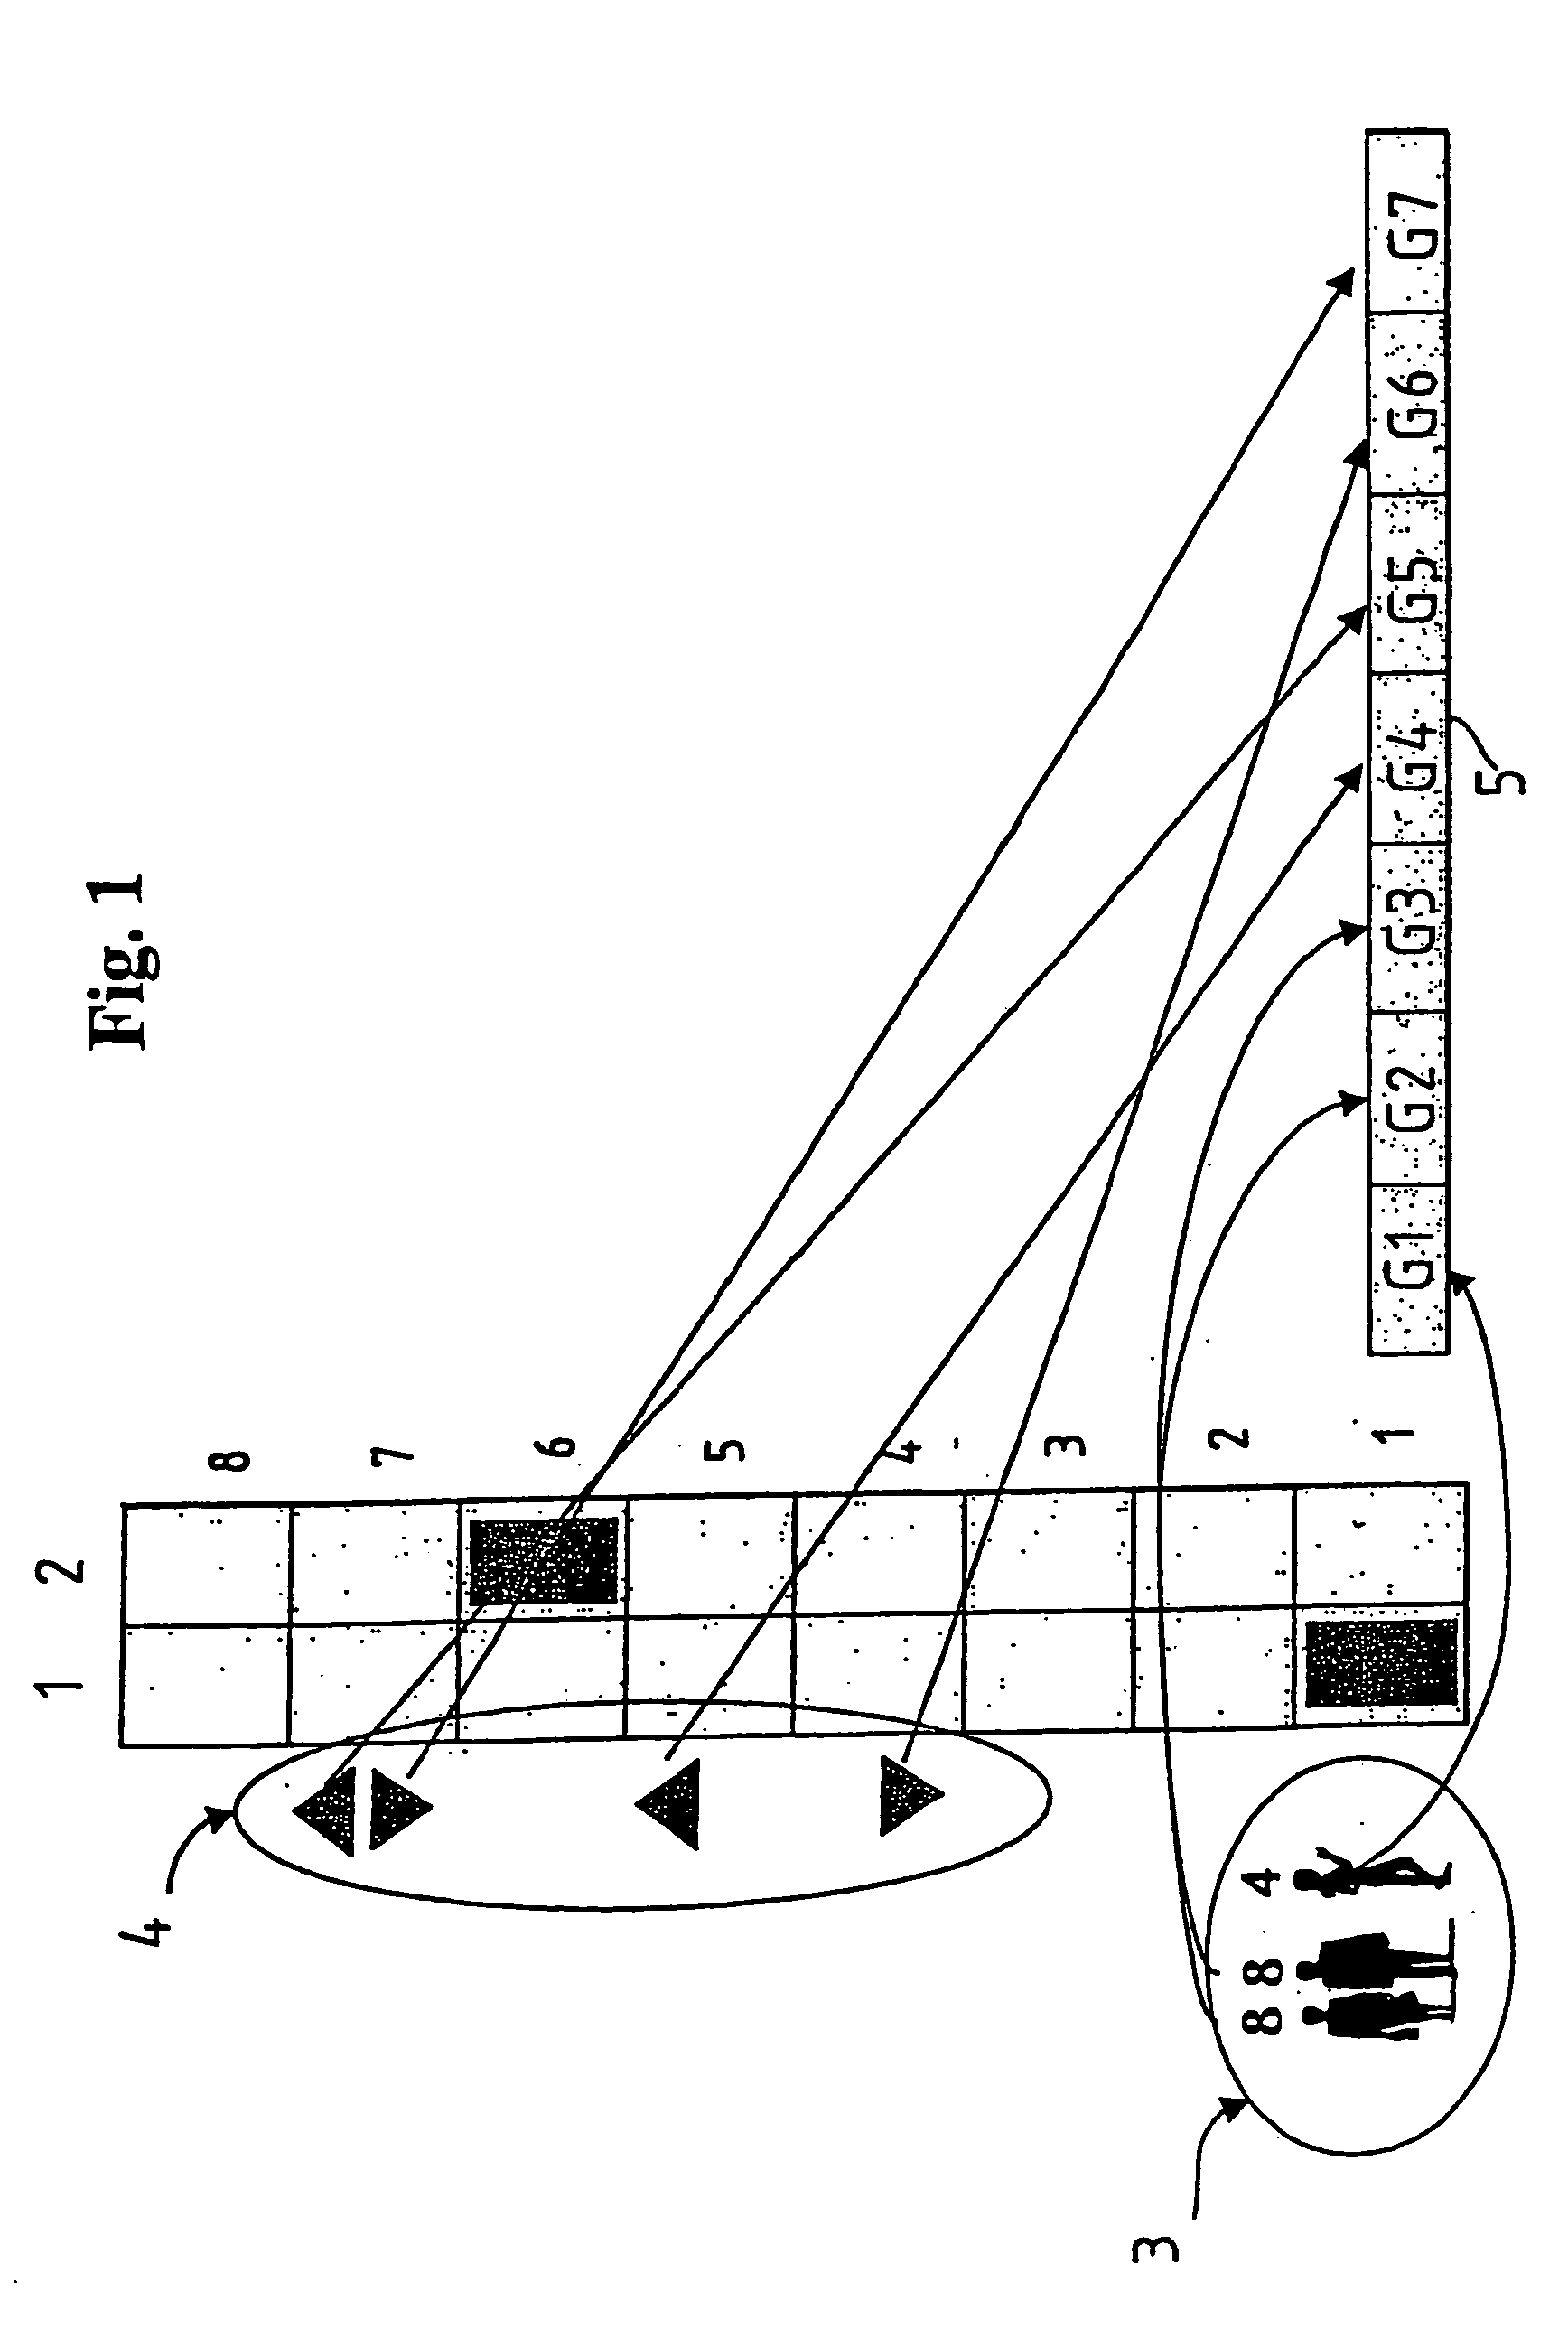 Genetic allocation method for an elevator group